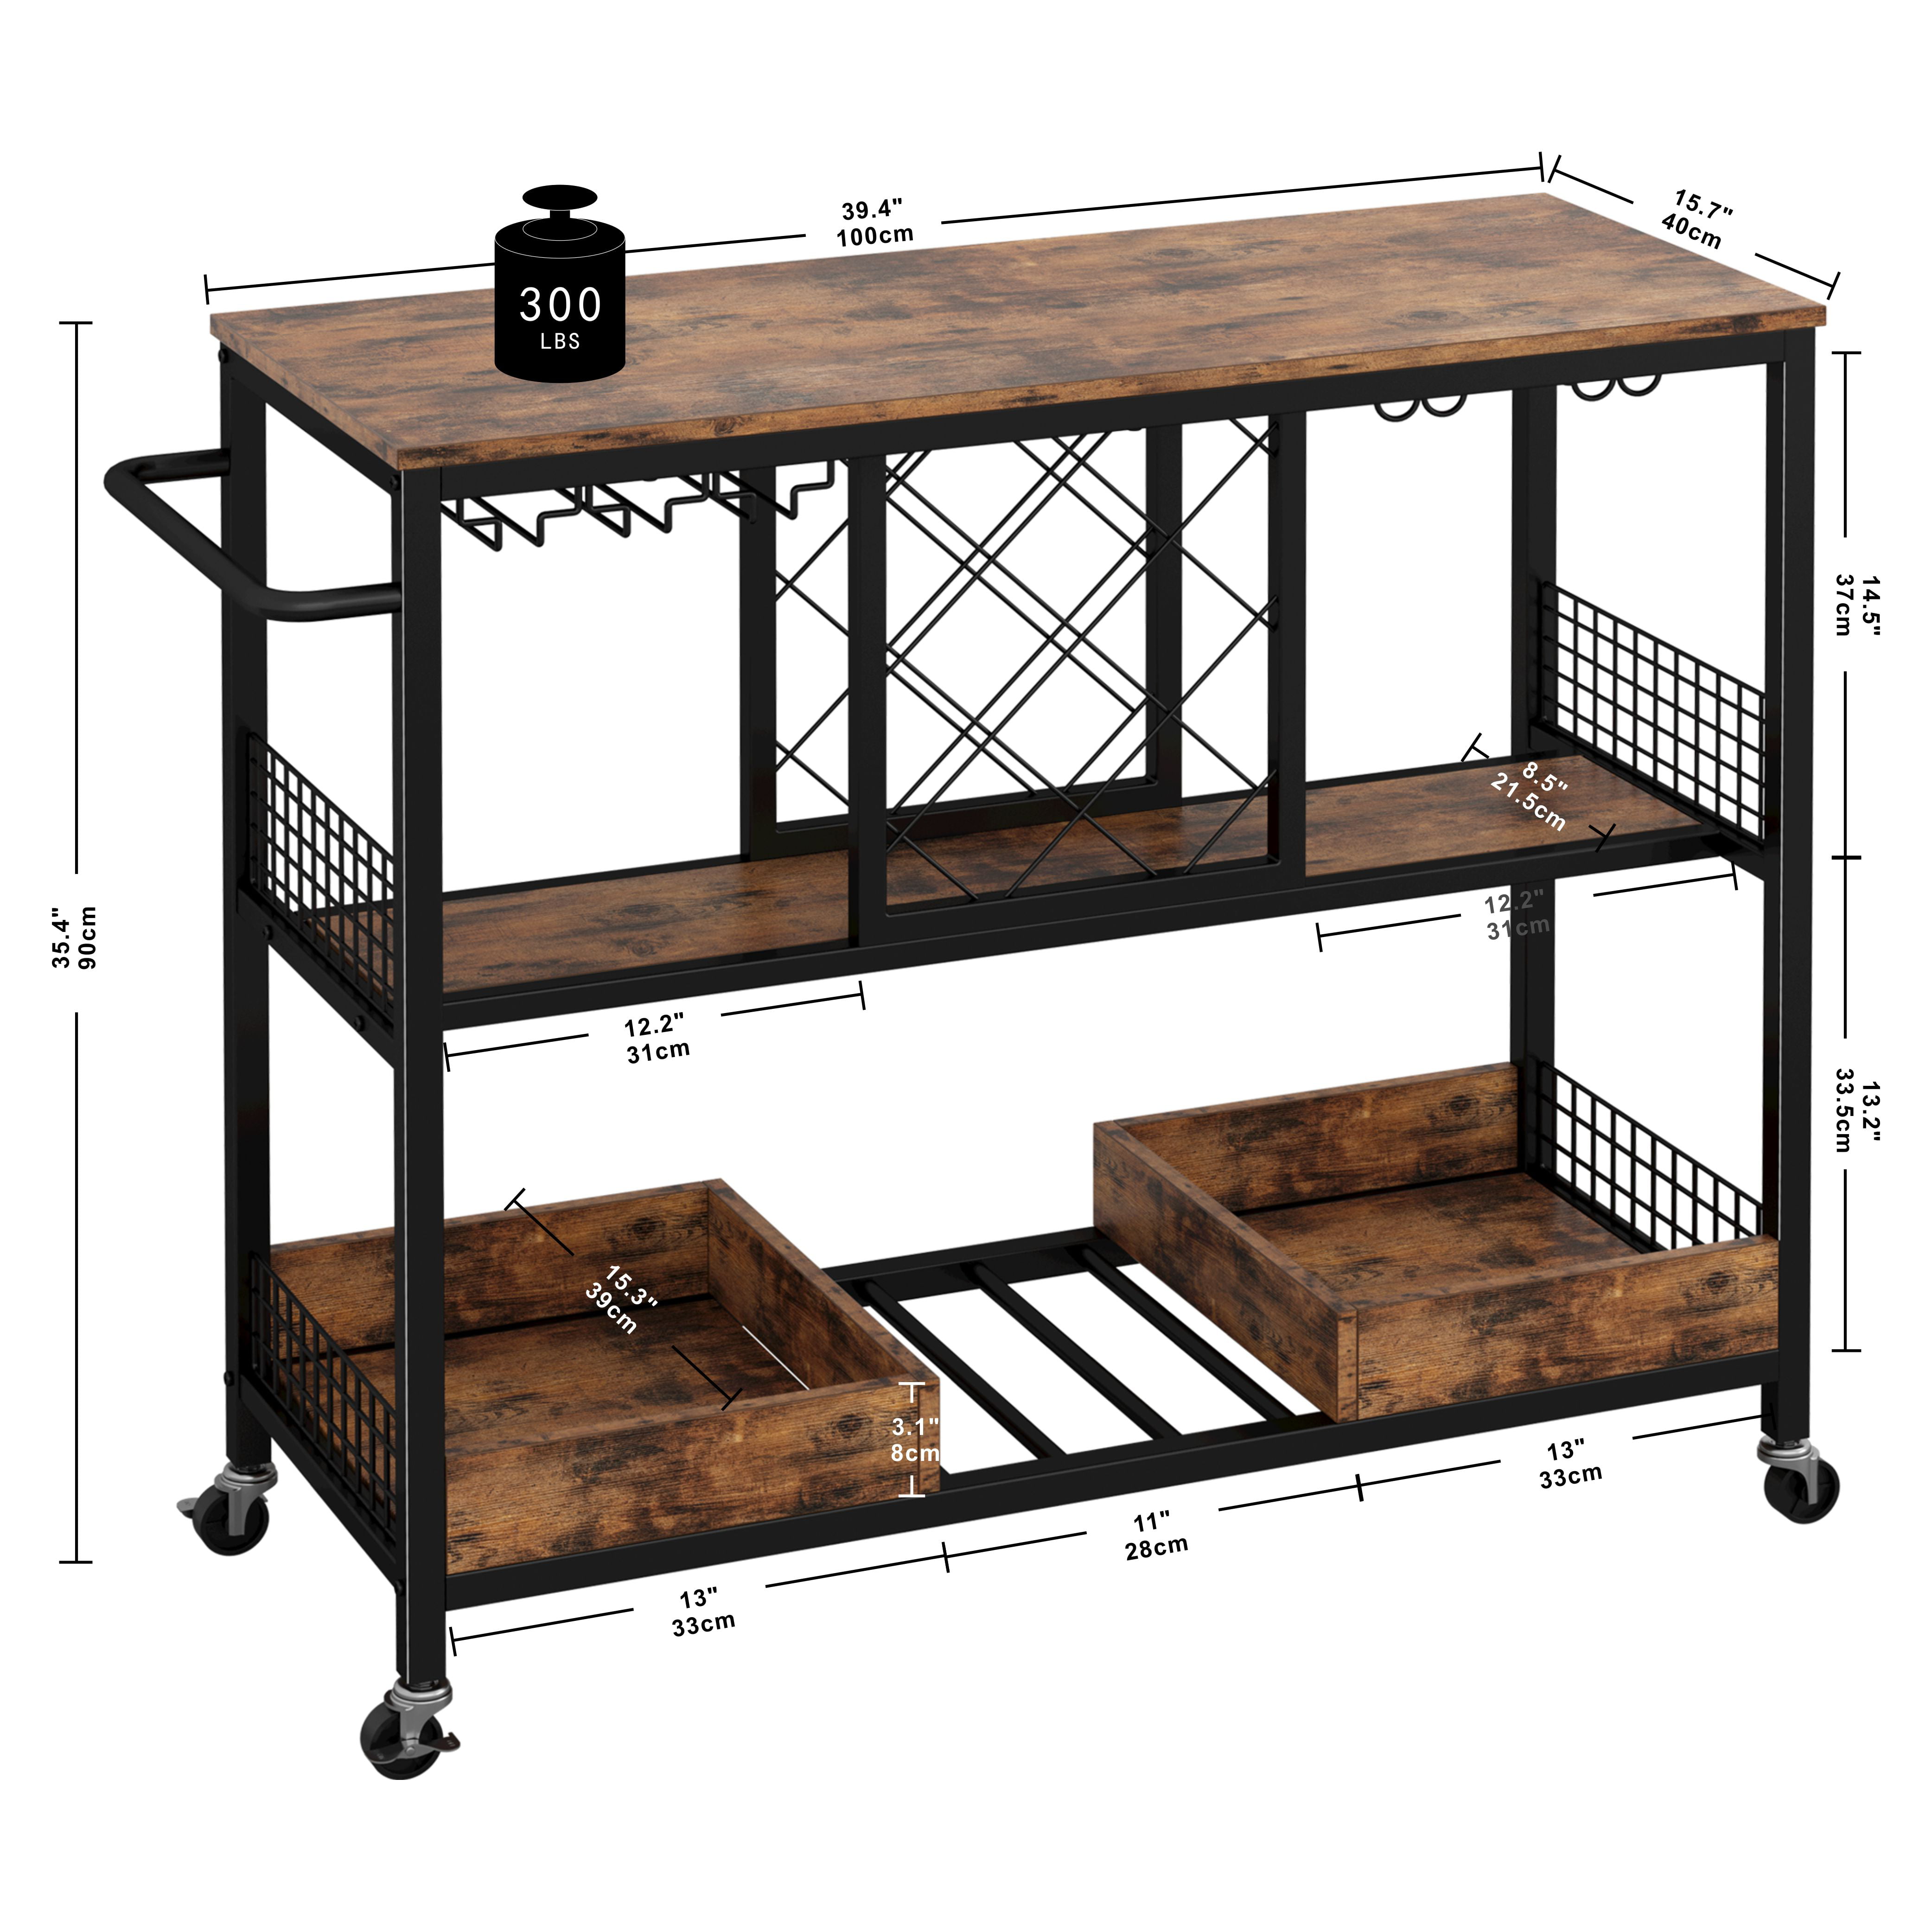 Eastern penance Dingy IRONCK Wine Rack Table, Industrial Bar Cart on Wheels Kitchen Storage Cart  for The Home Wood and Metal Frame, Rustic Brown - Walmart.com